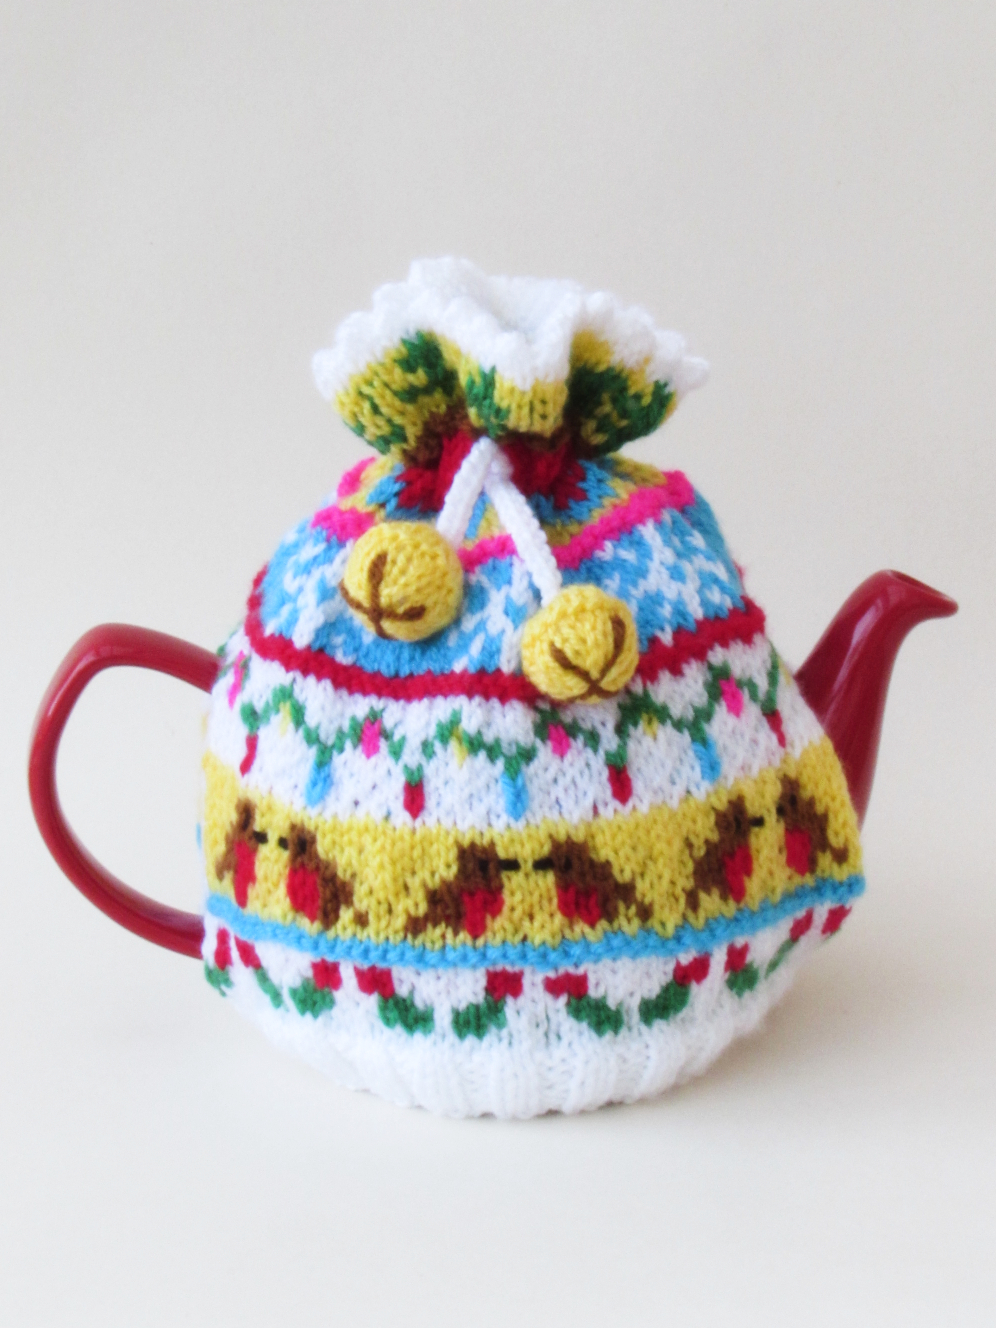 Hand made vintage style cable knitted tea cosy Vintage Peach kitchen teapot accessory 